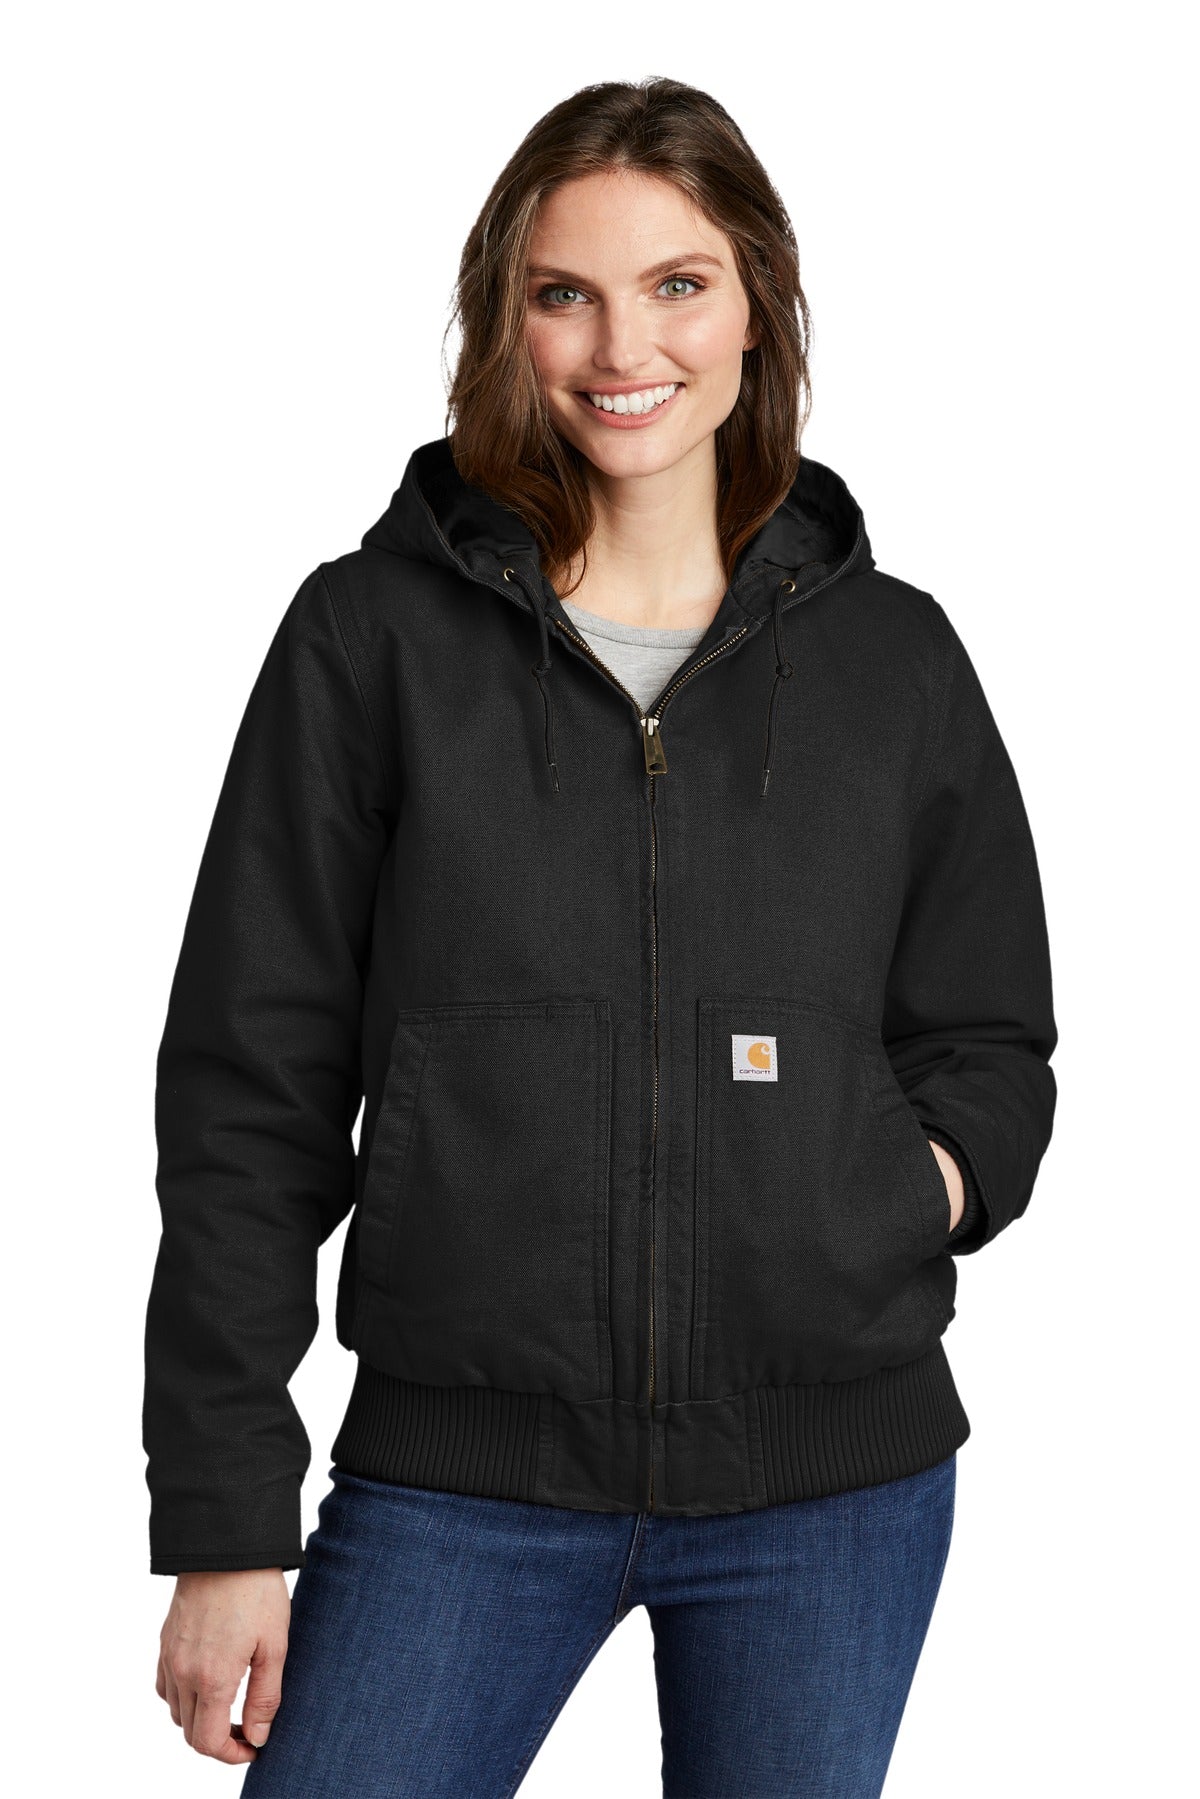 Carhartt® Women's Washed Duck Active Jac. CT104053 - DFW Impression